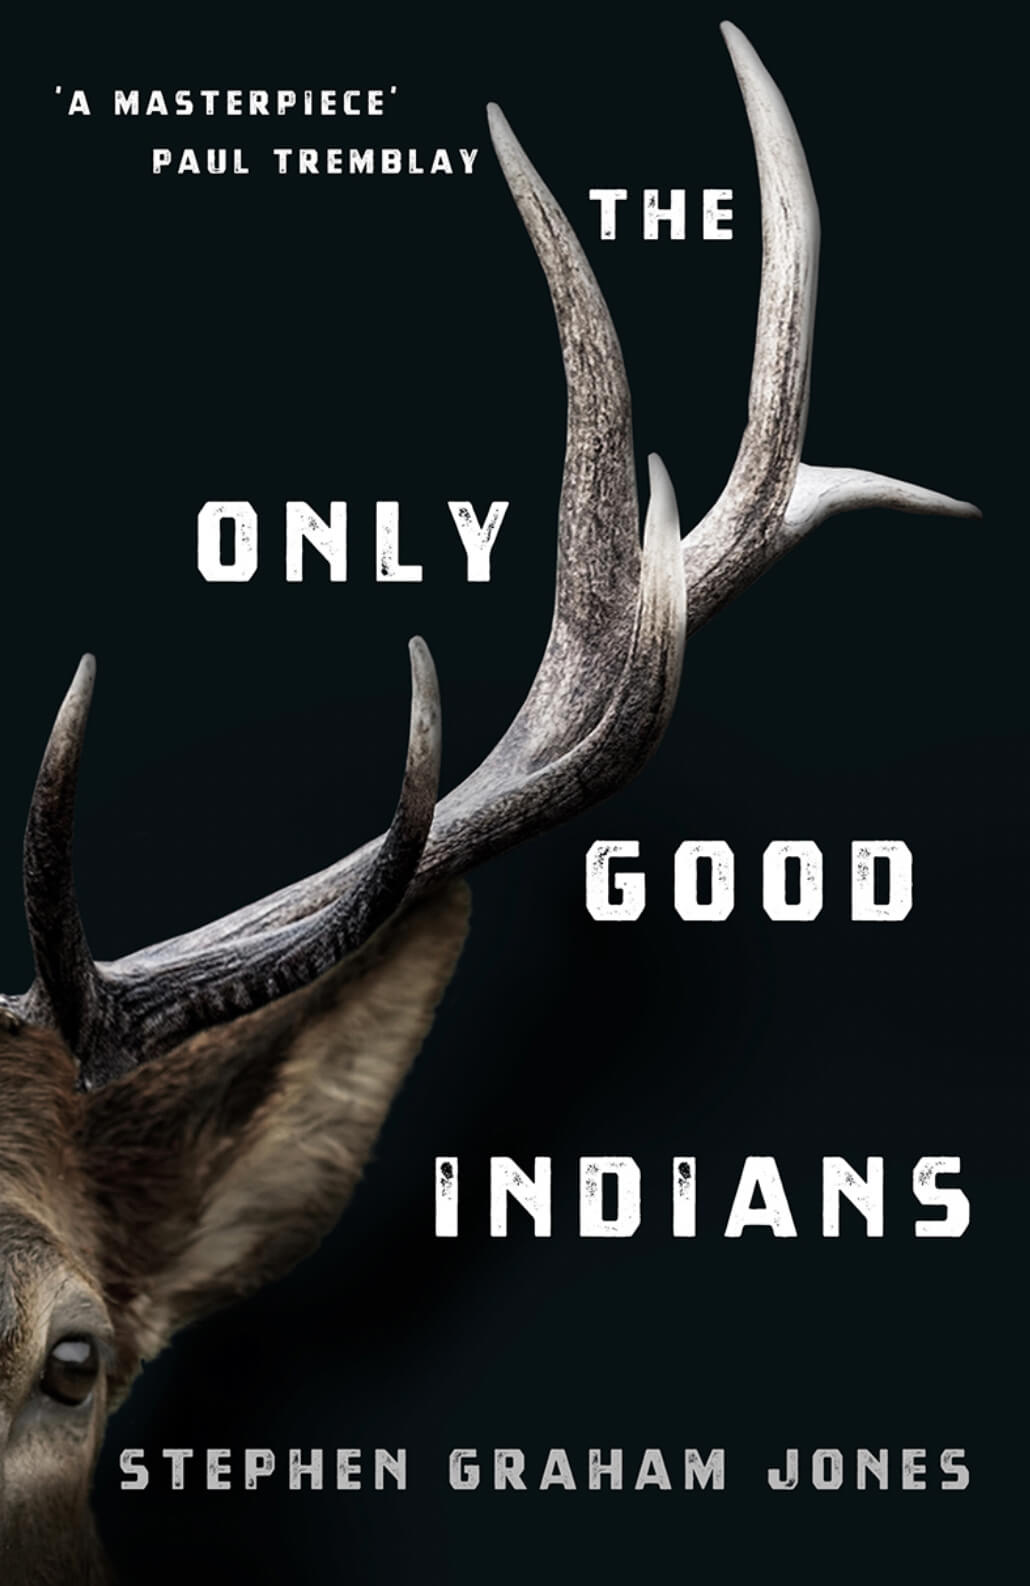 Cover of The Only Good Indians by Stephen Graham Jones